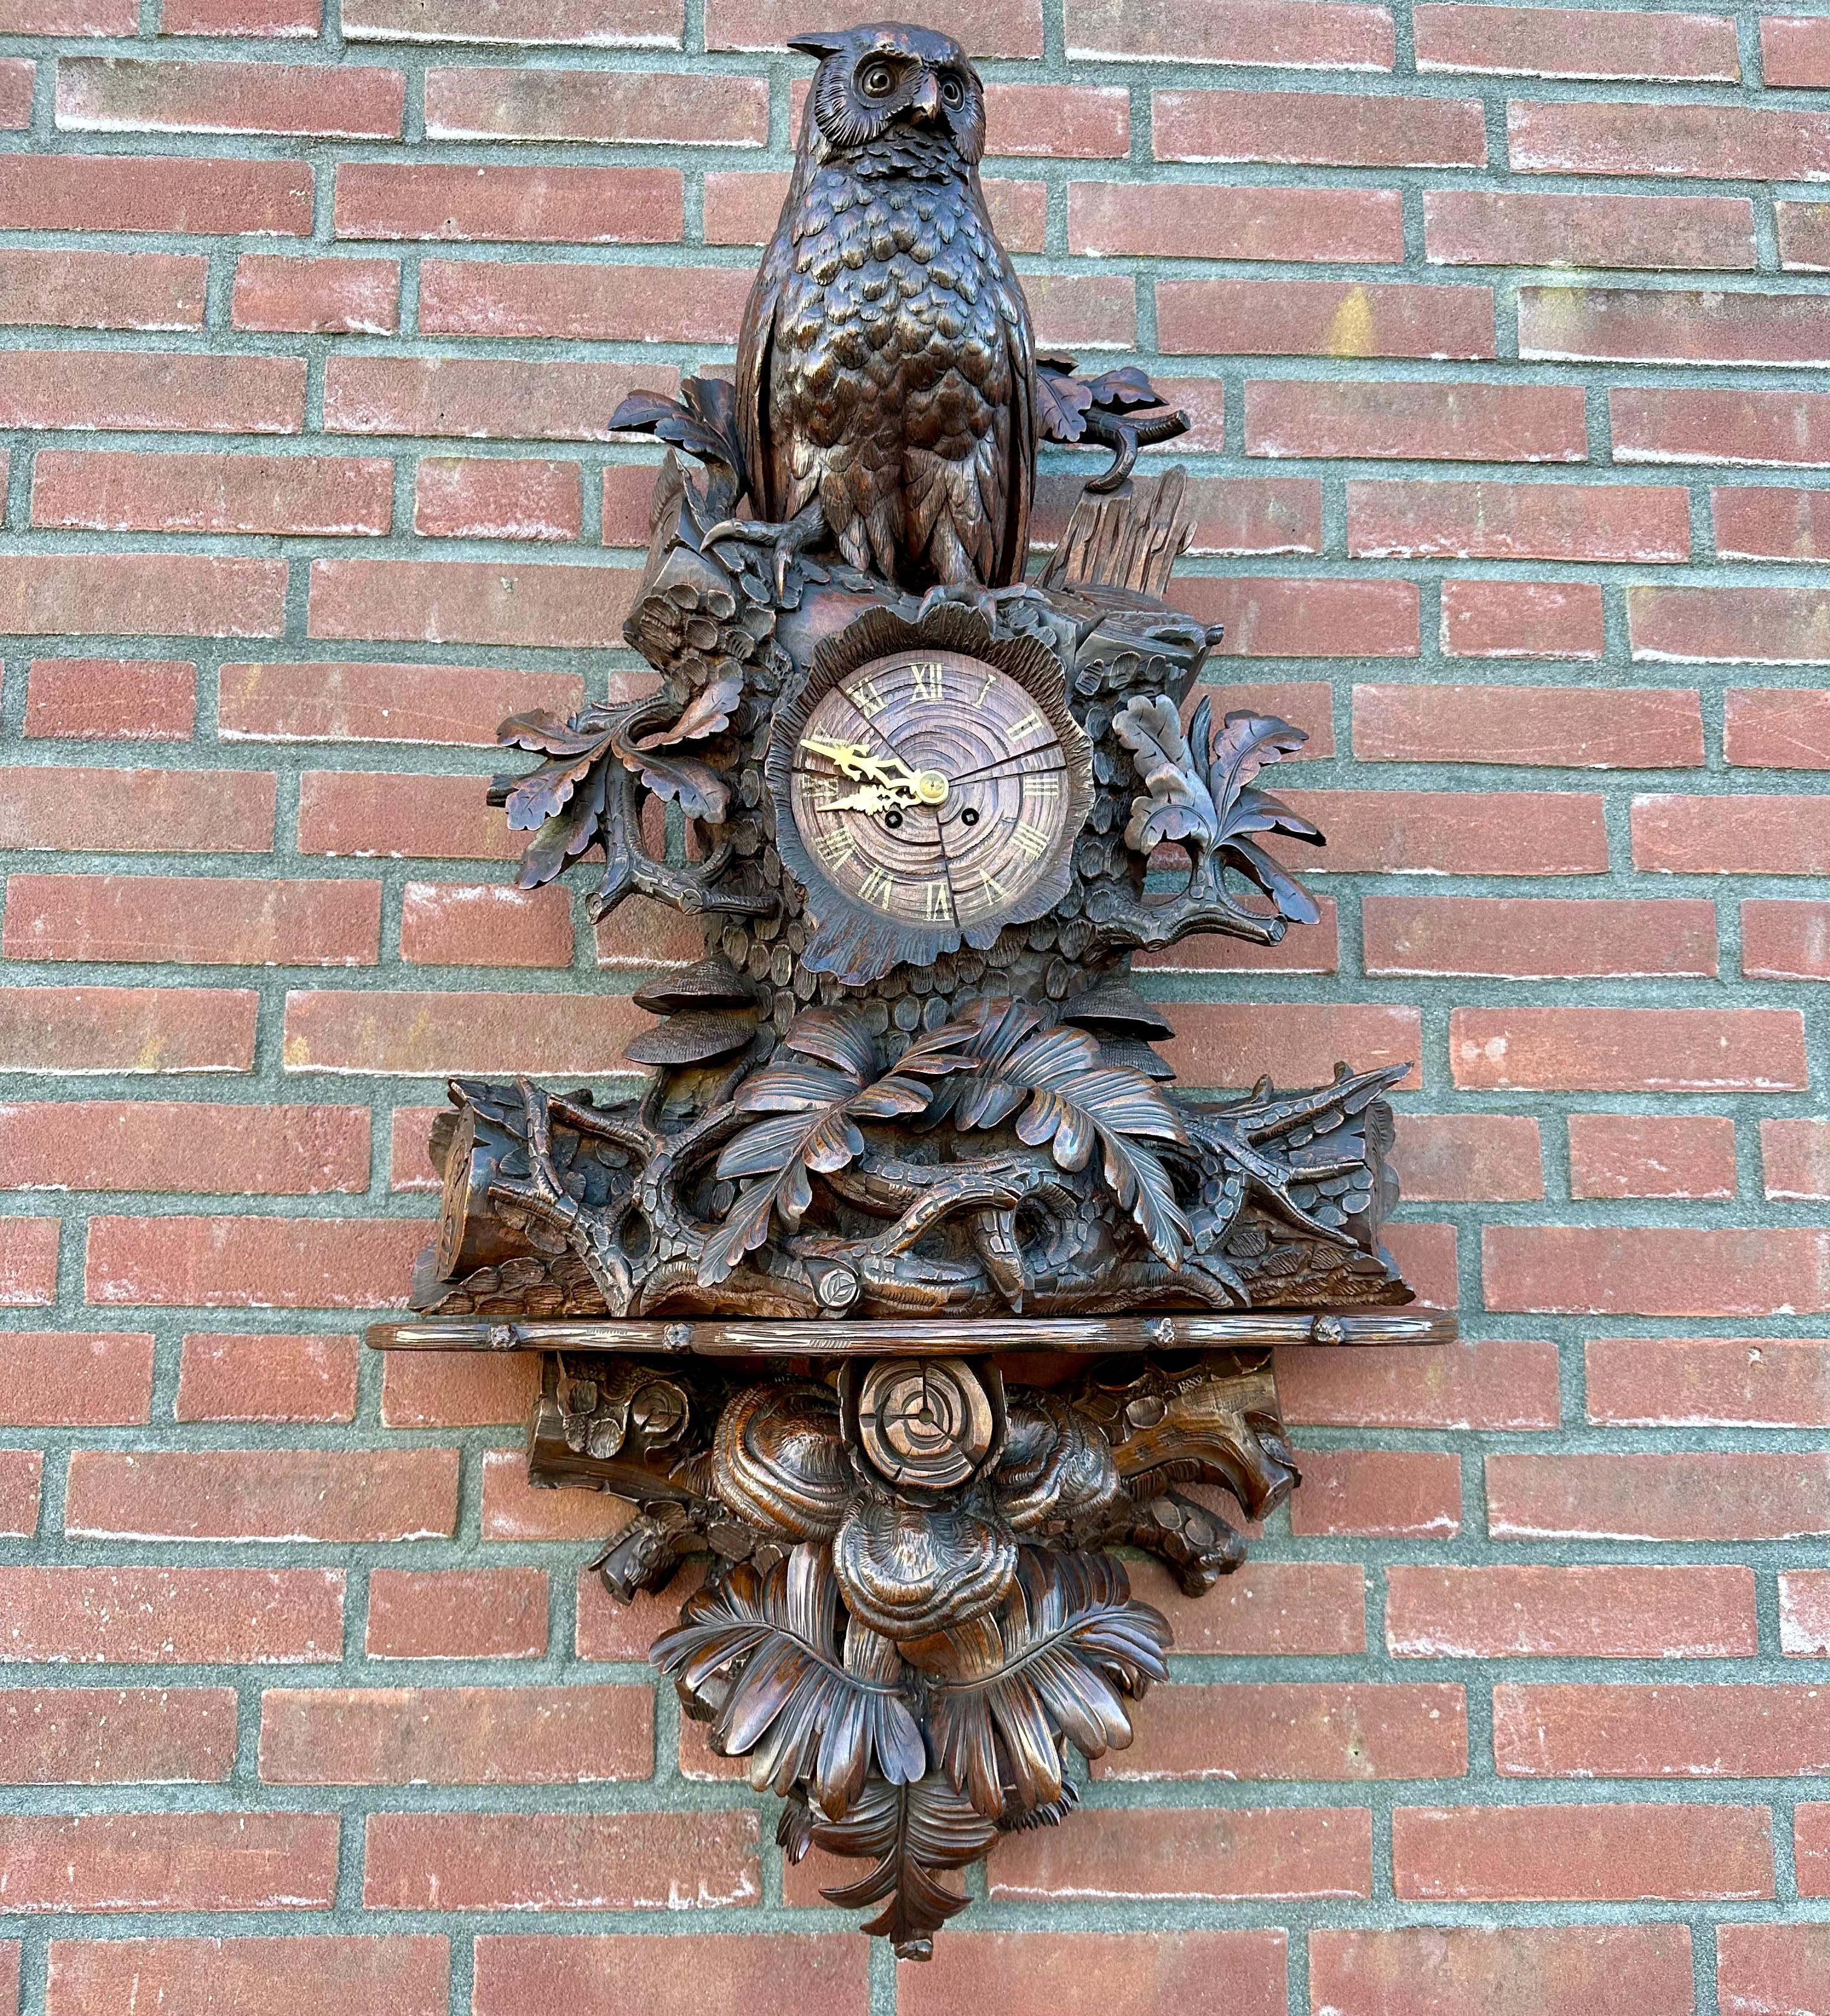 Top quality, hand carved and truly impressive antique clock.

Over the years we have had the pleasure of owning and selling a number of beautiful Black Forest antiques, but never did we come accross a 19th century Black Forest wall clock of this